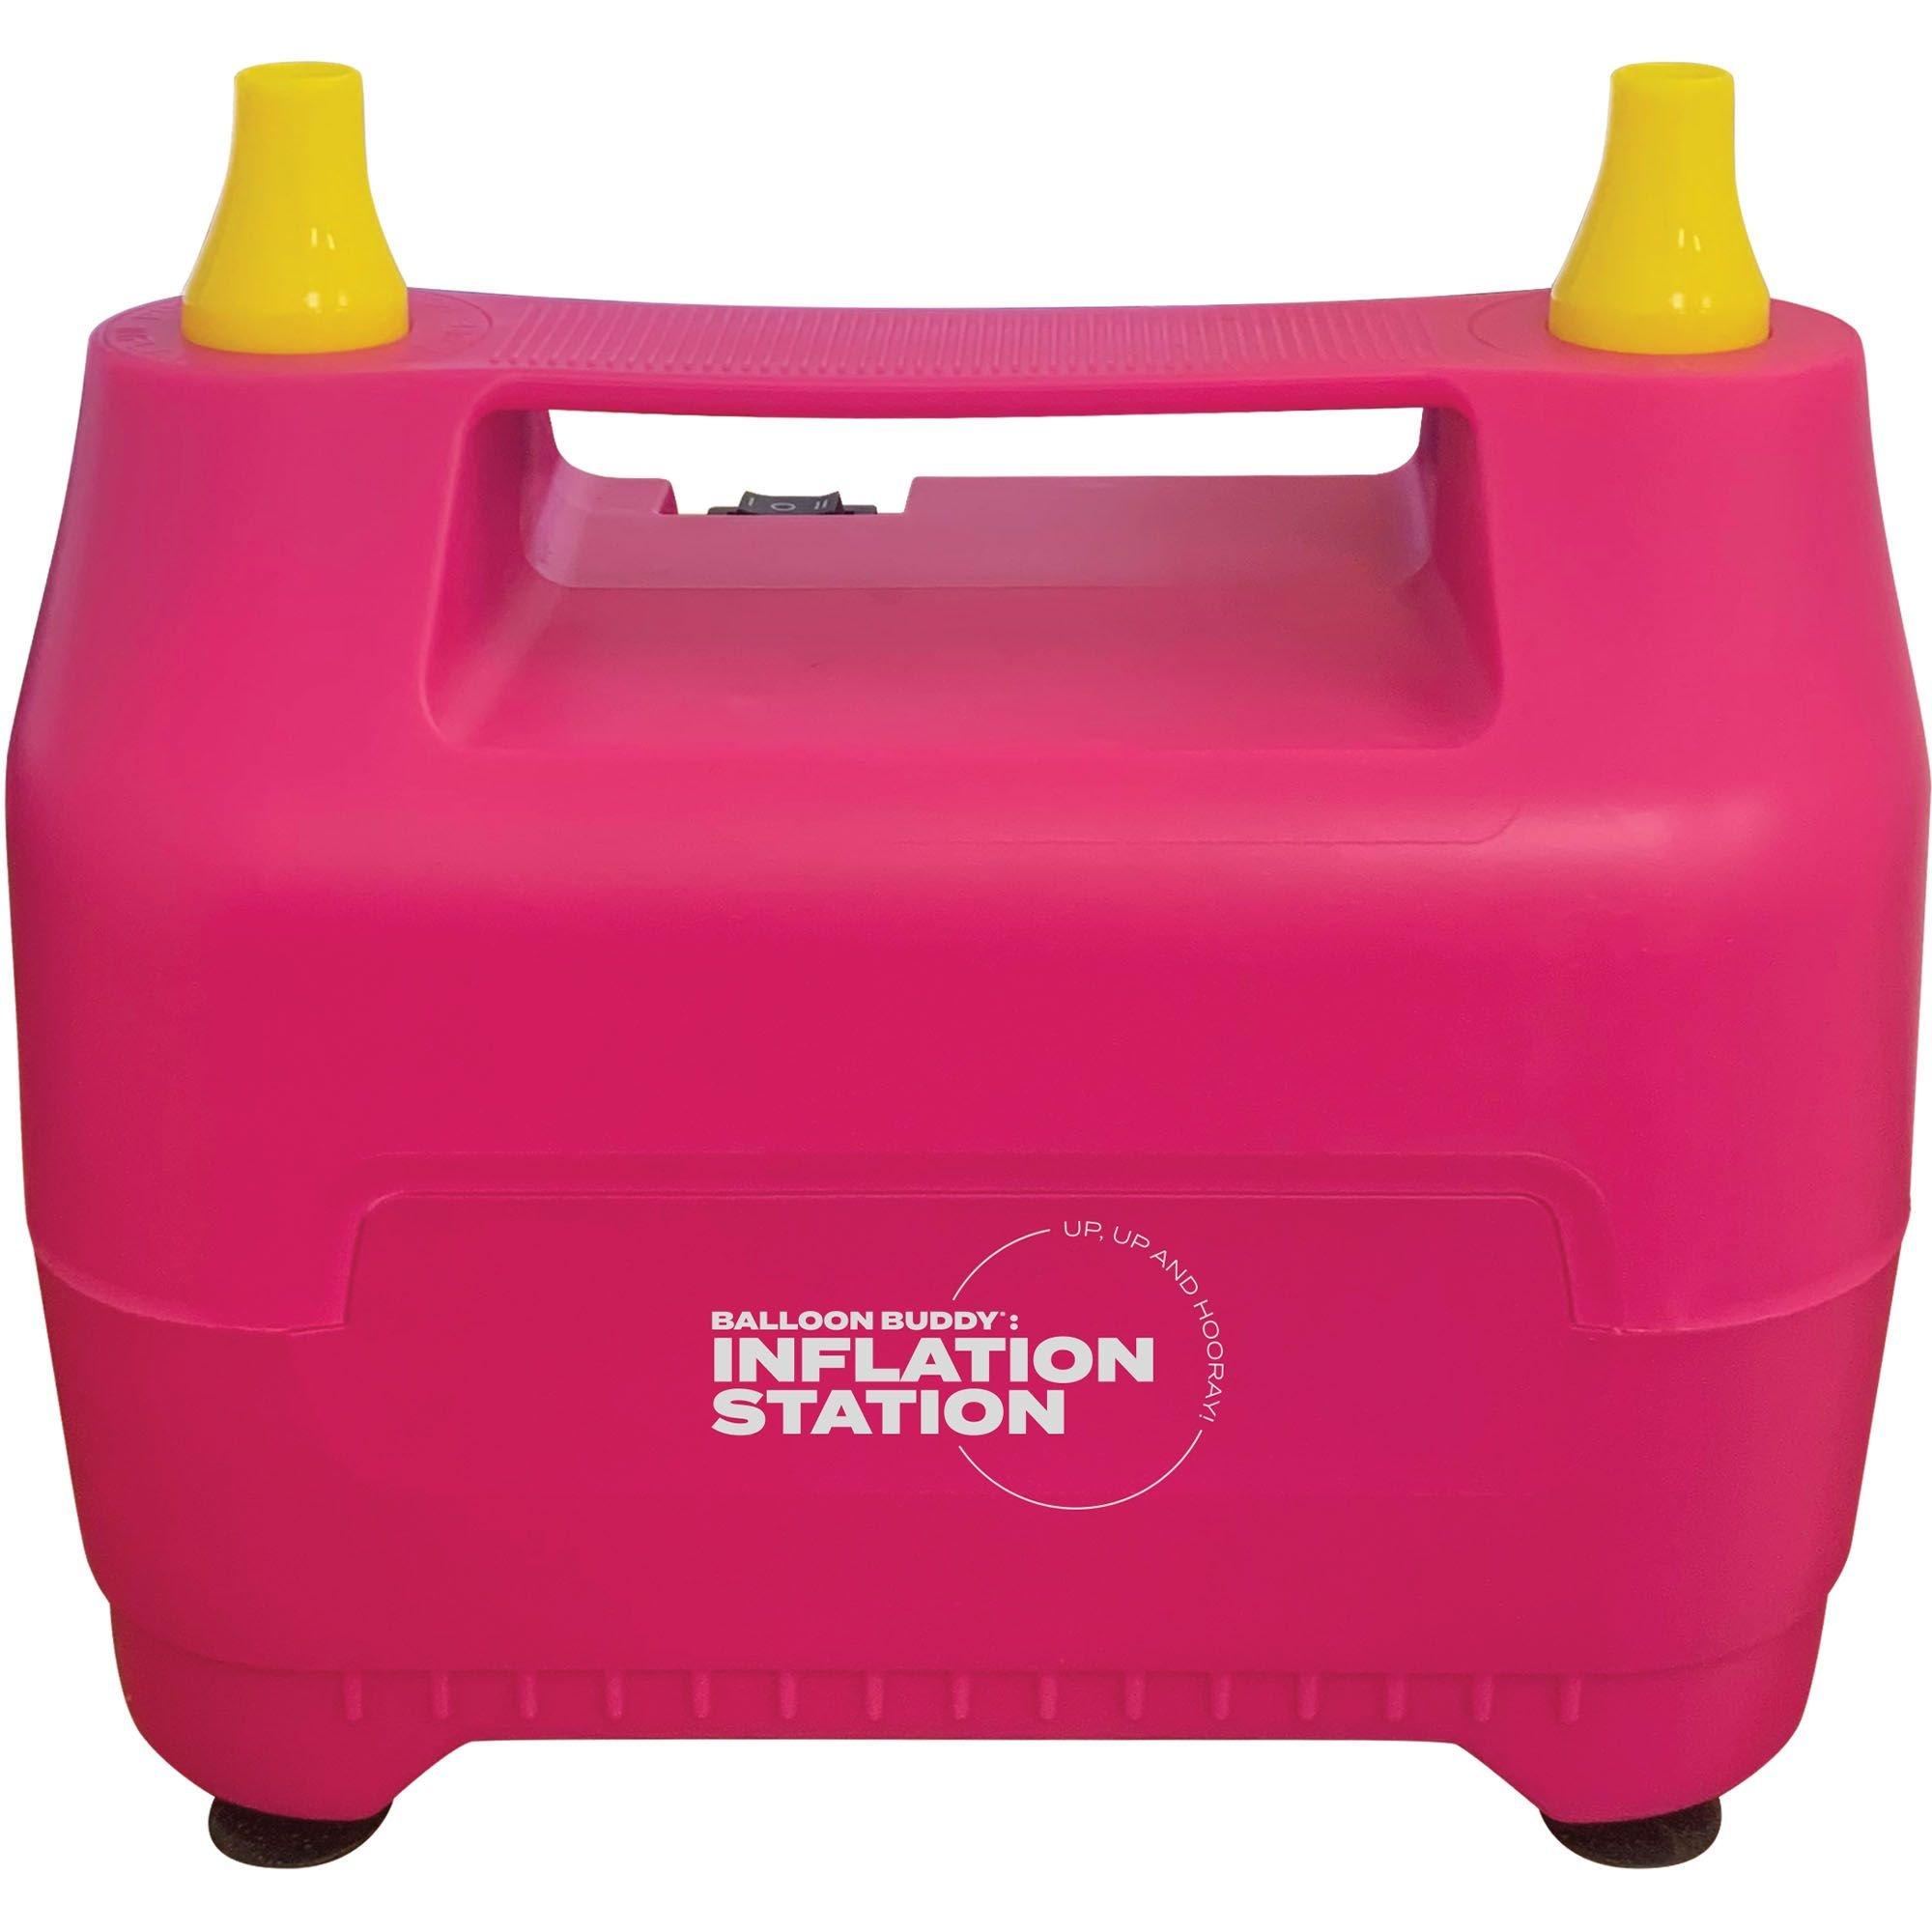 Dual Electric Balloon Pump, 7in x 8in - Balloon Buddy Inflation